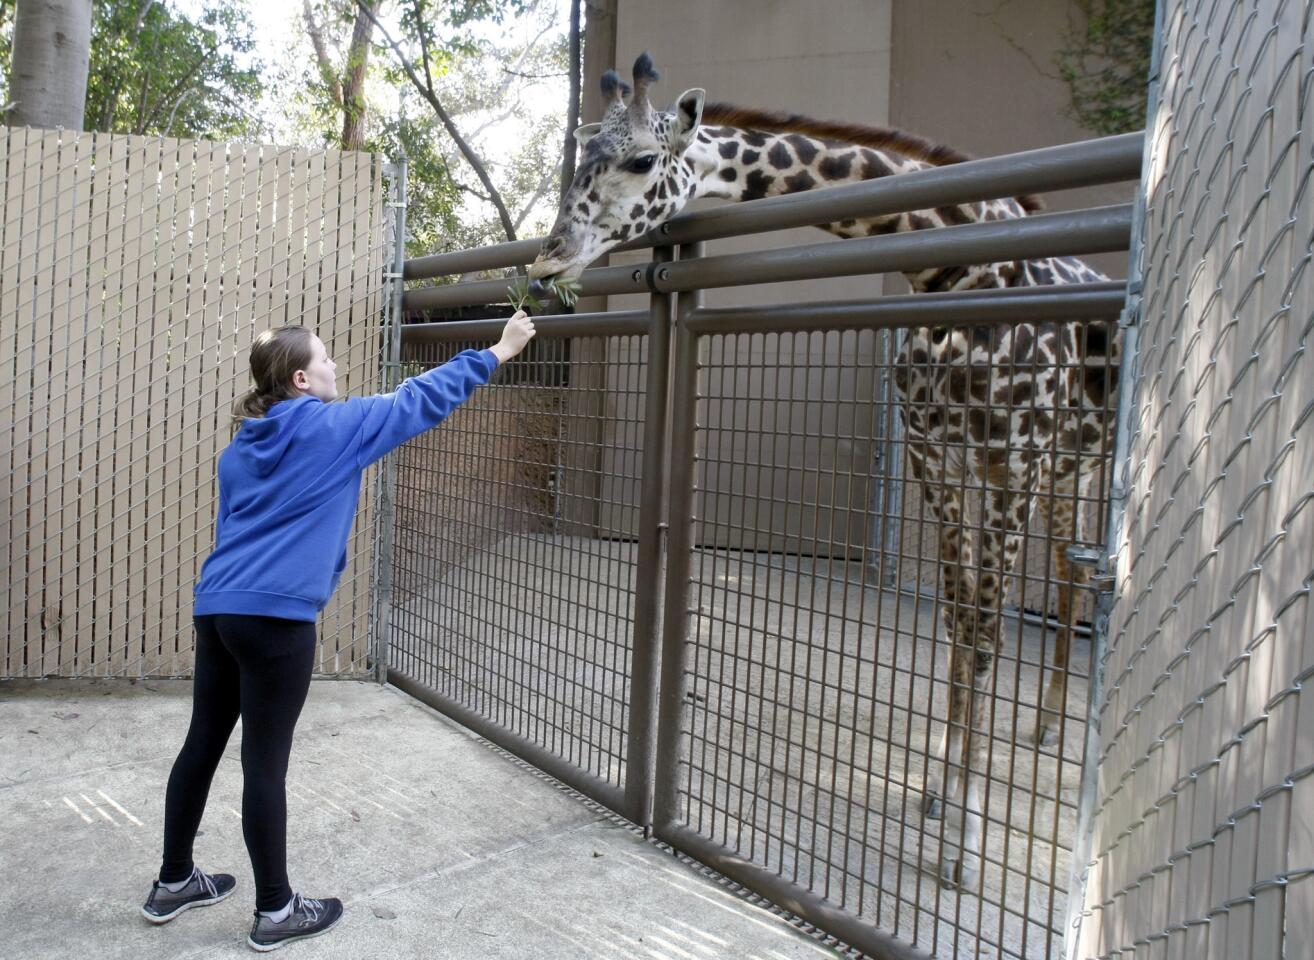 Anastasia Zubkoff, 11 of Los Angeles, feeds a giraffe named Zanibon at the Los Angeles Zoo Giraffe Feeding media preview at the zoo in Los Angeles on Thursday, Feb. 16, 2017. Guests can experience a one-on-one encounter with the giraffes. Giraffe feeding costs $5 and hours are daily at 11 a.m. and 2:30 p.m. at the giraffe exhibit.